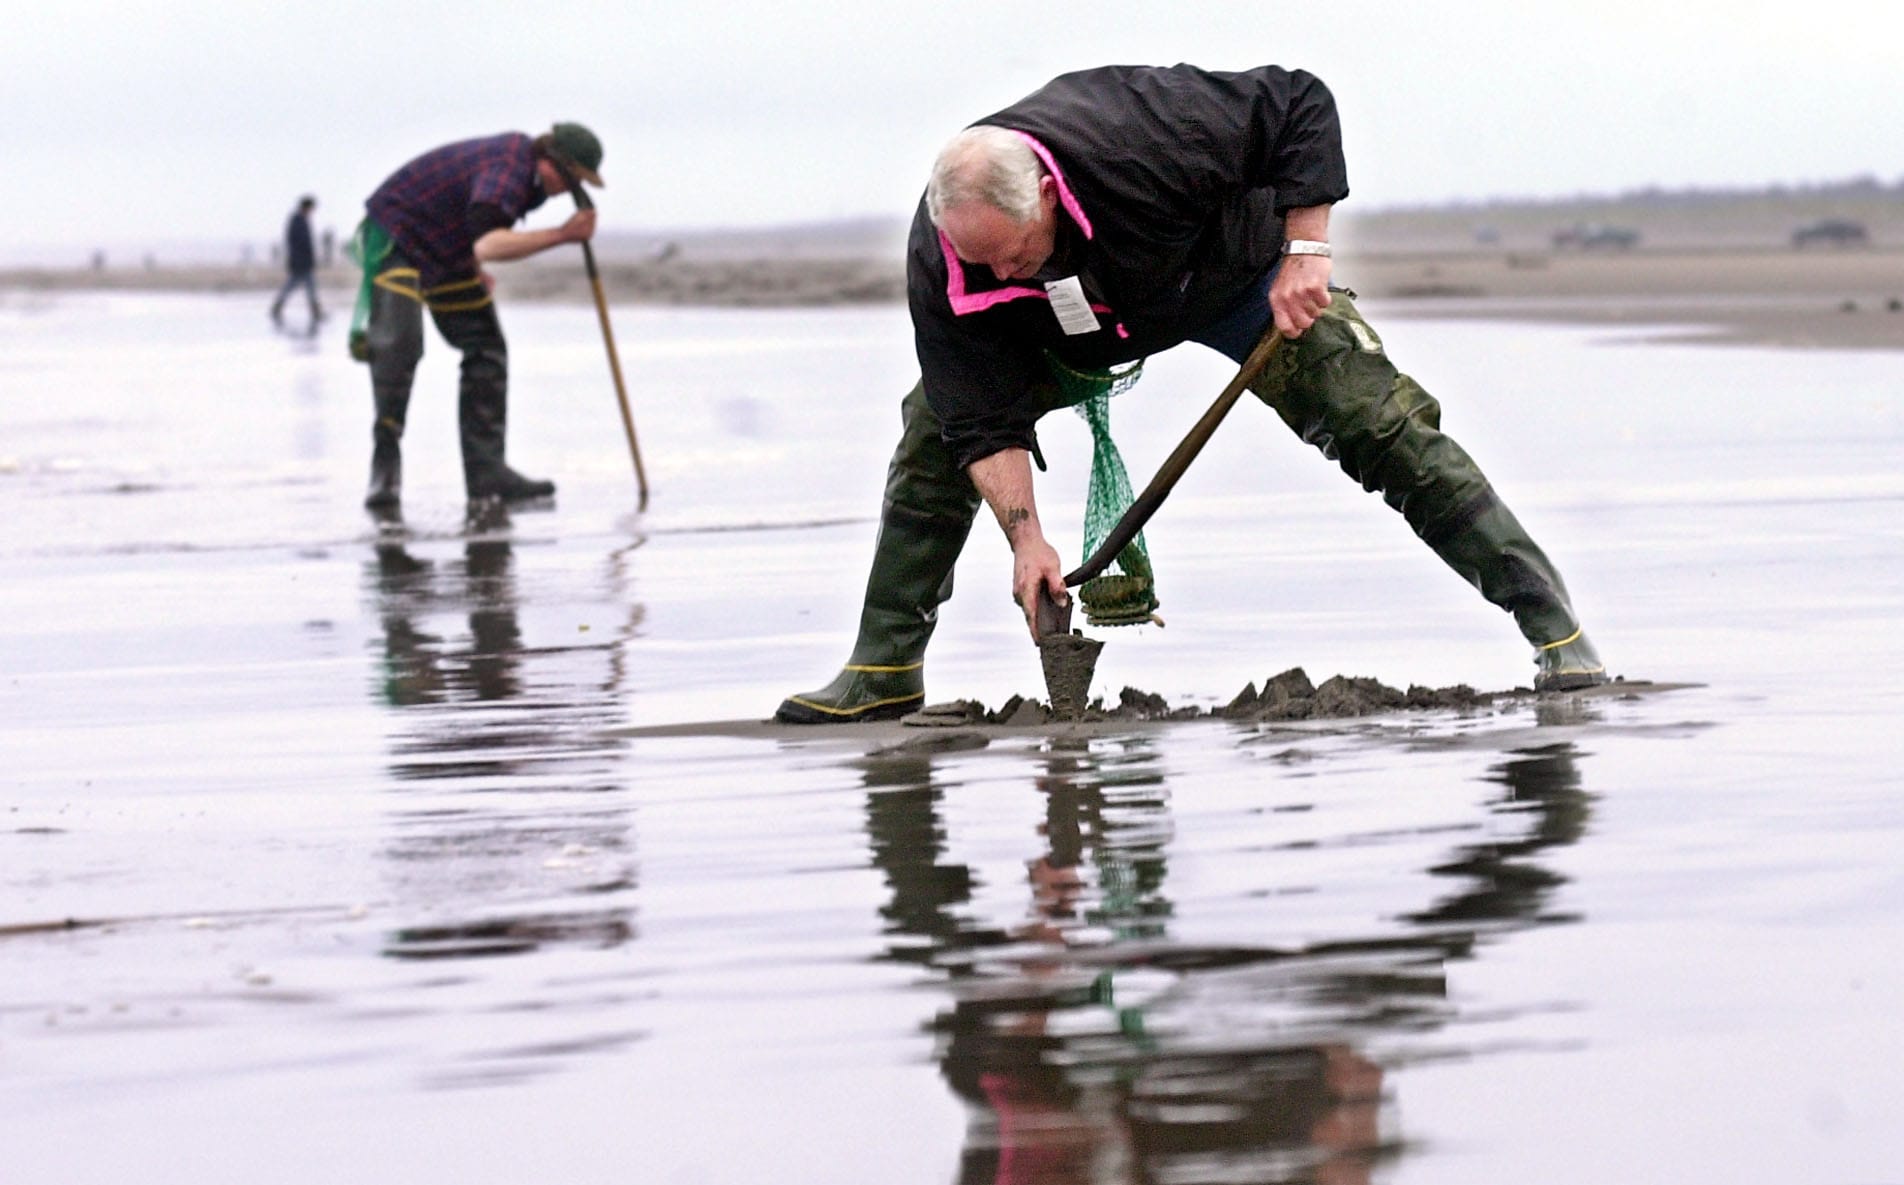 Razor clam diggers have had a good season this winter and spring.